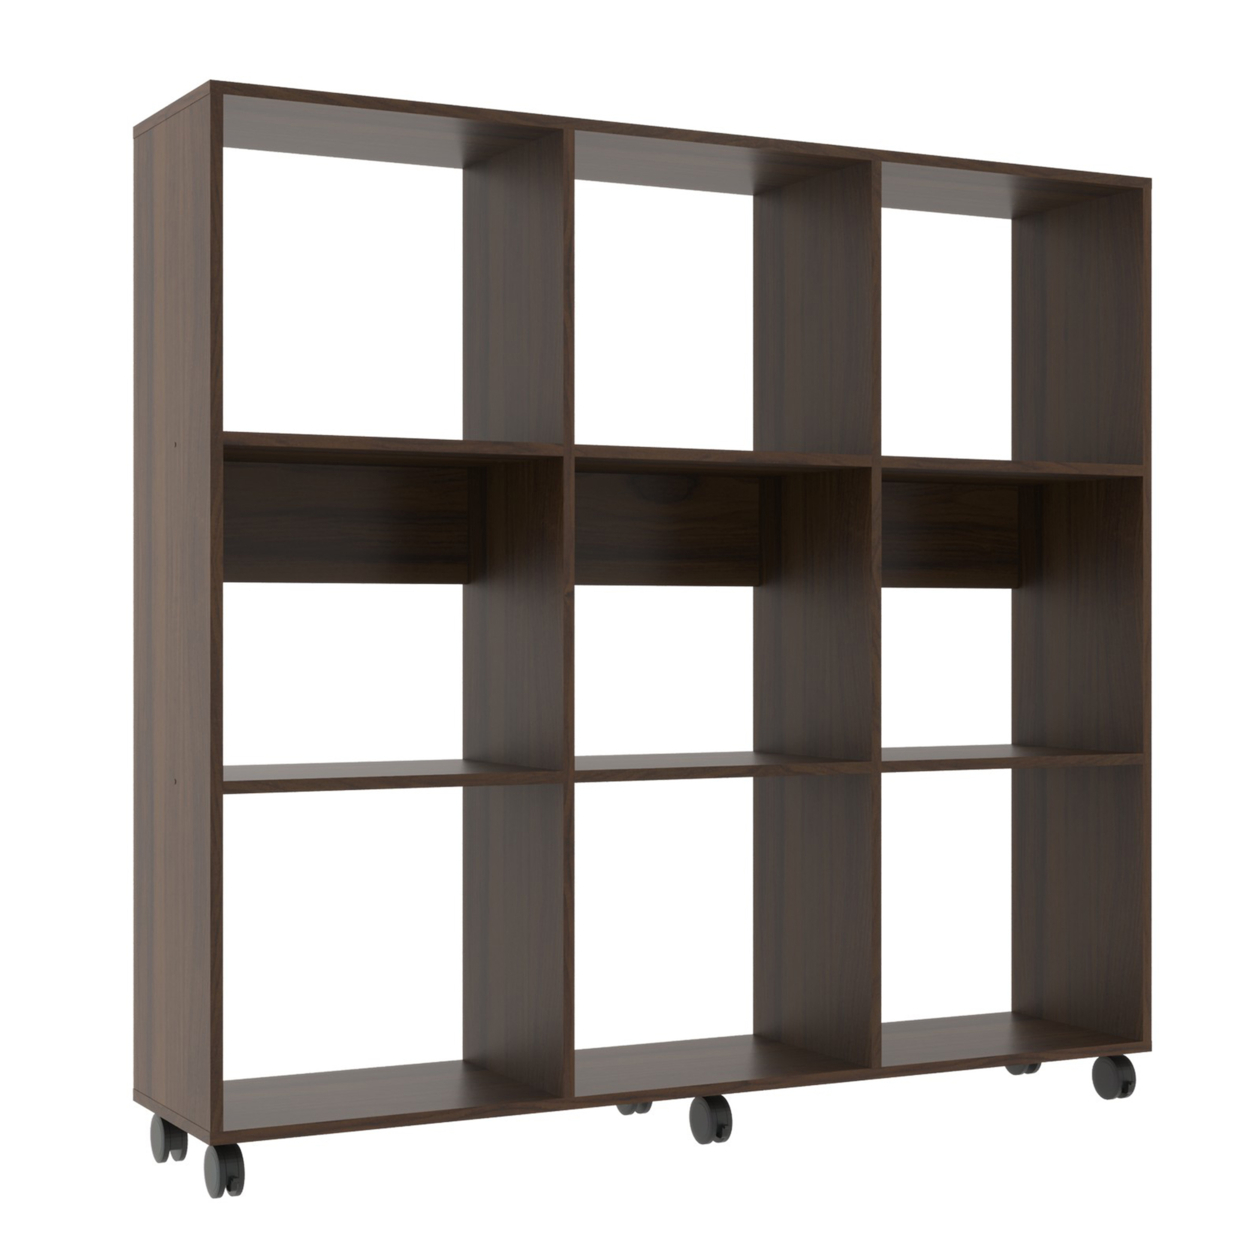 52.6 Inch Wooden Bookcase With 9 Open Compartments And Casters, Walnut Brown, Saltoro Sherpi